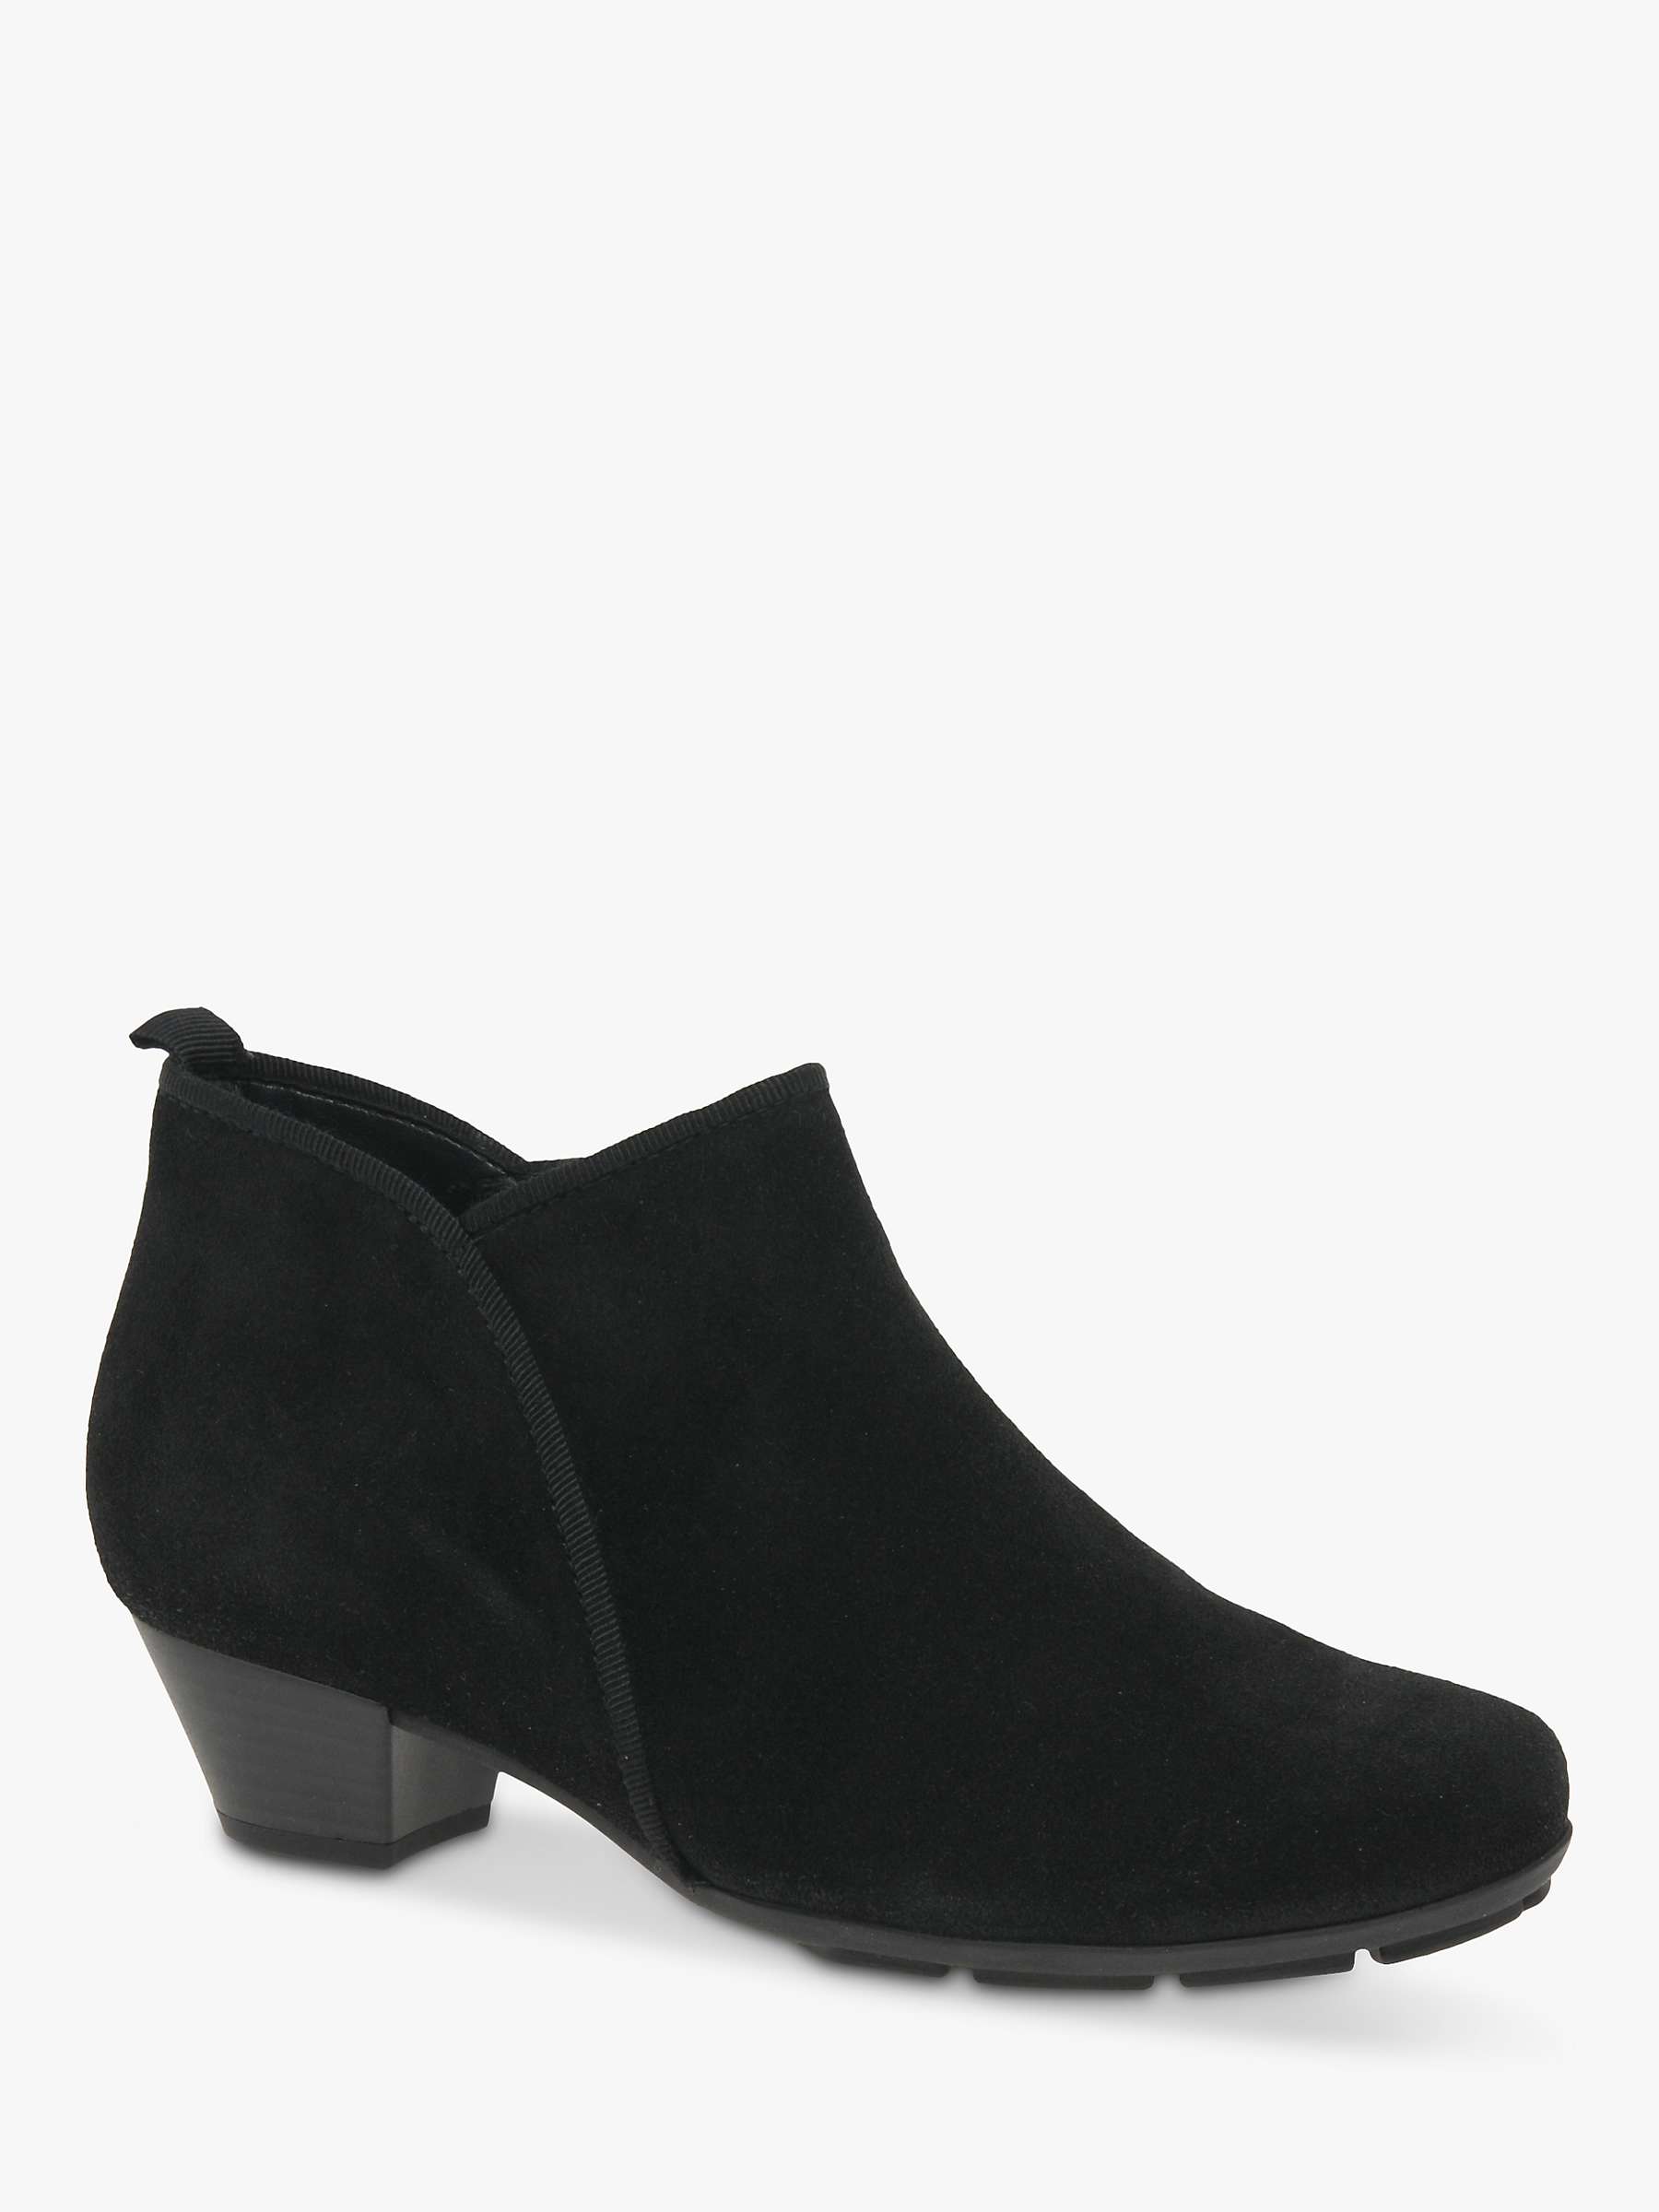 Gabor Suede Ankle Boots, Black at John Lewis & Partners